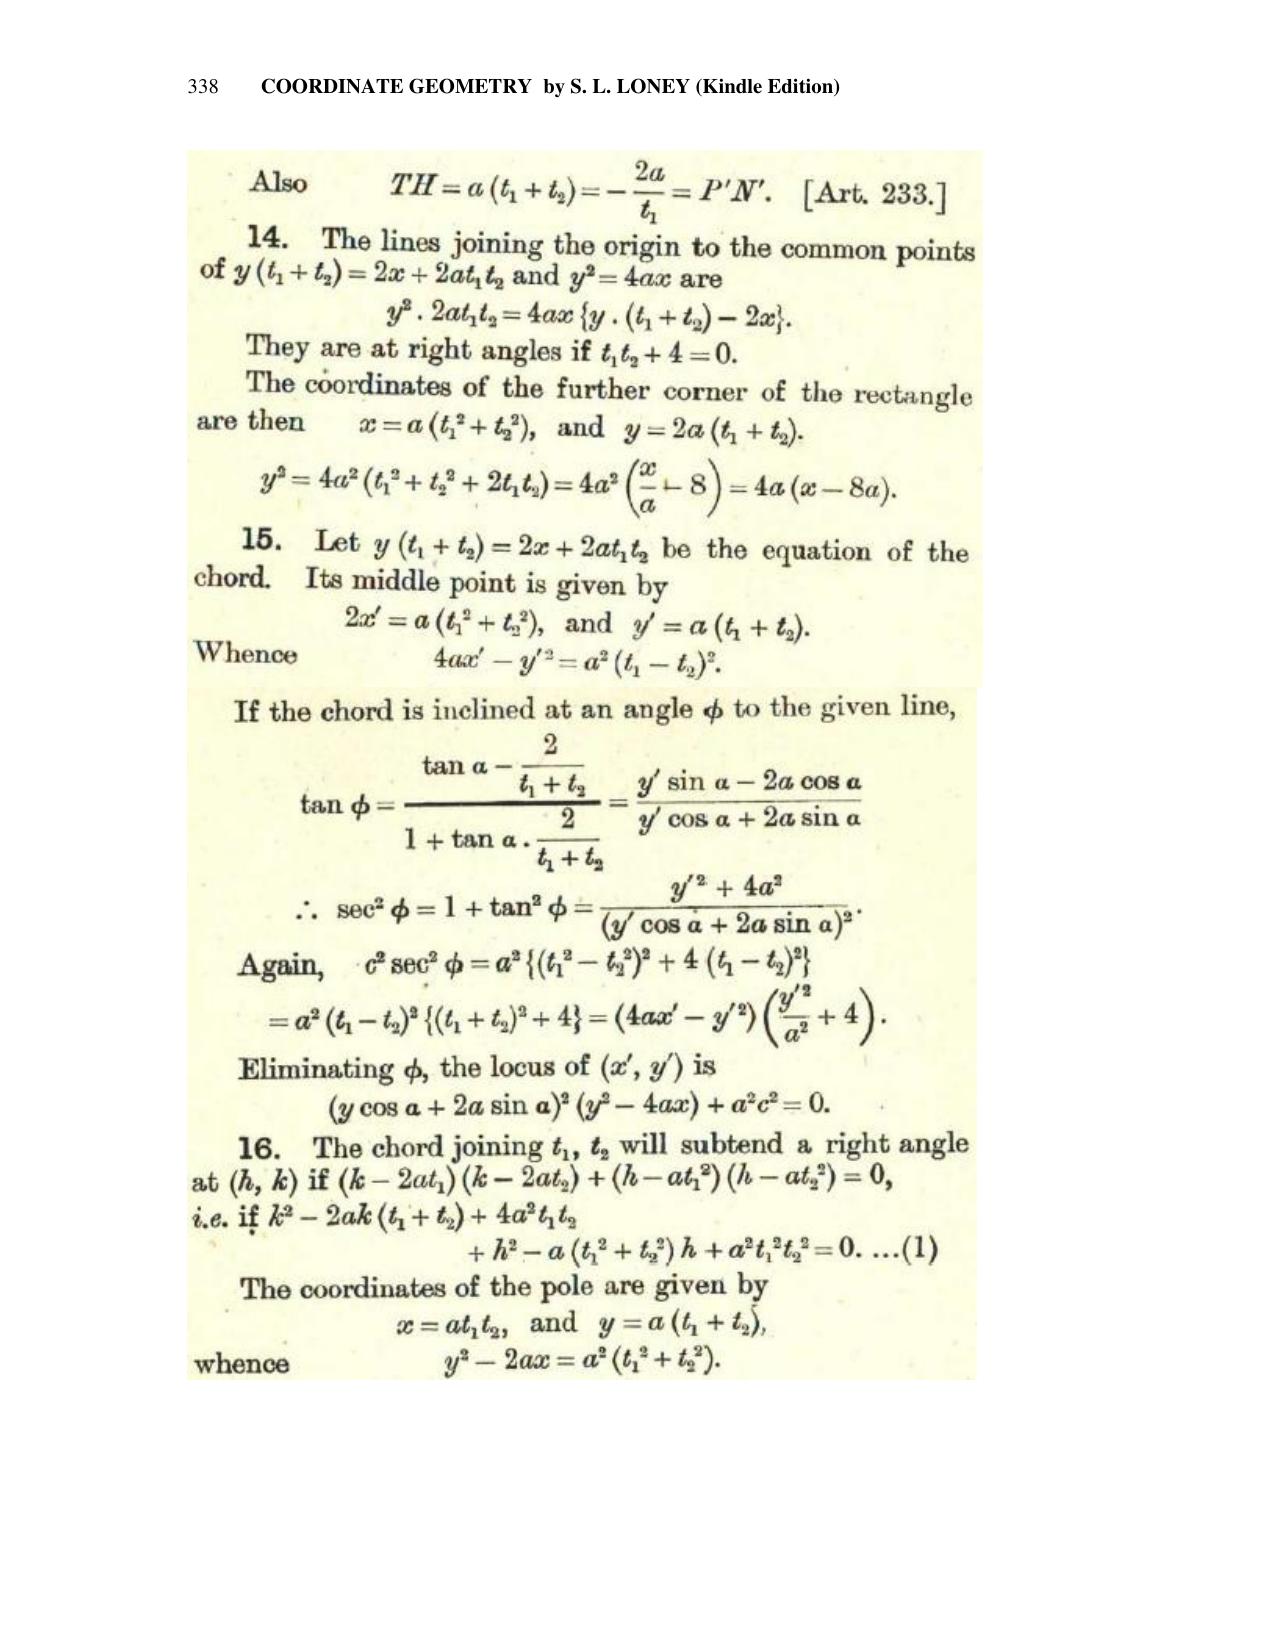 Chapter 10: The Parabola - SL Loney Solutions: The Elements of Coordinate Geometry - Page 52